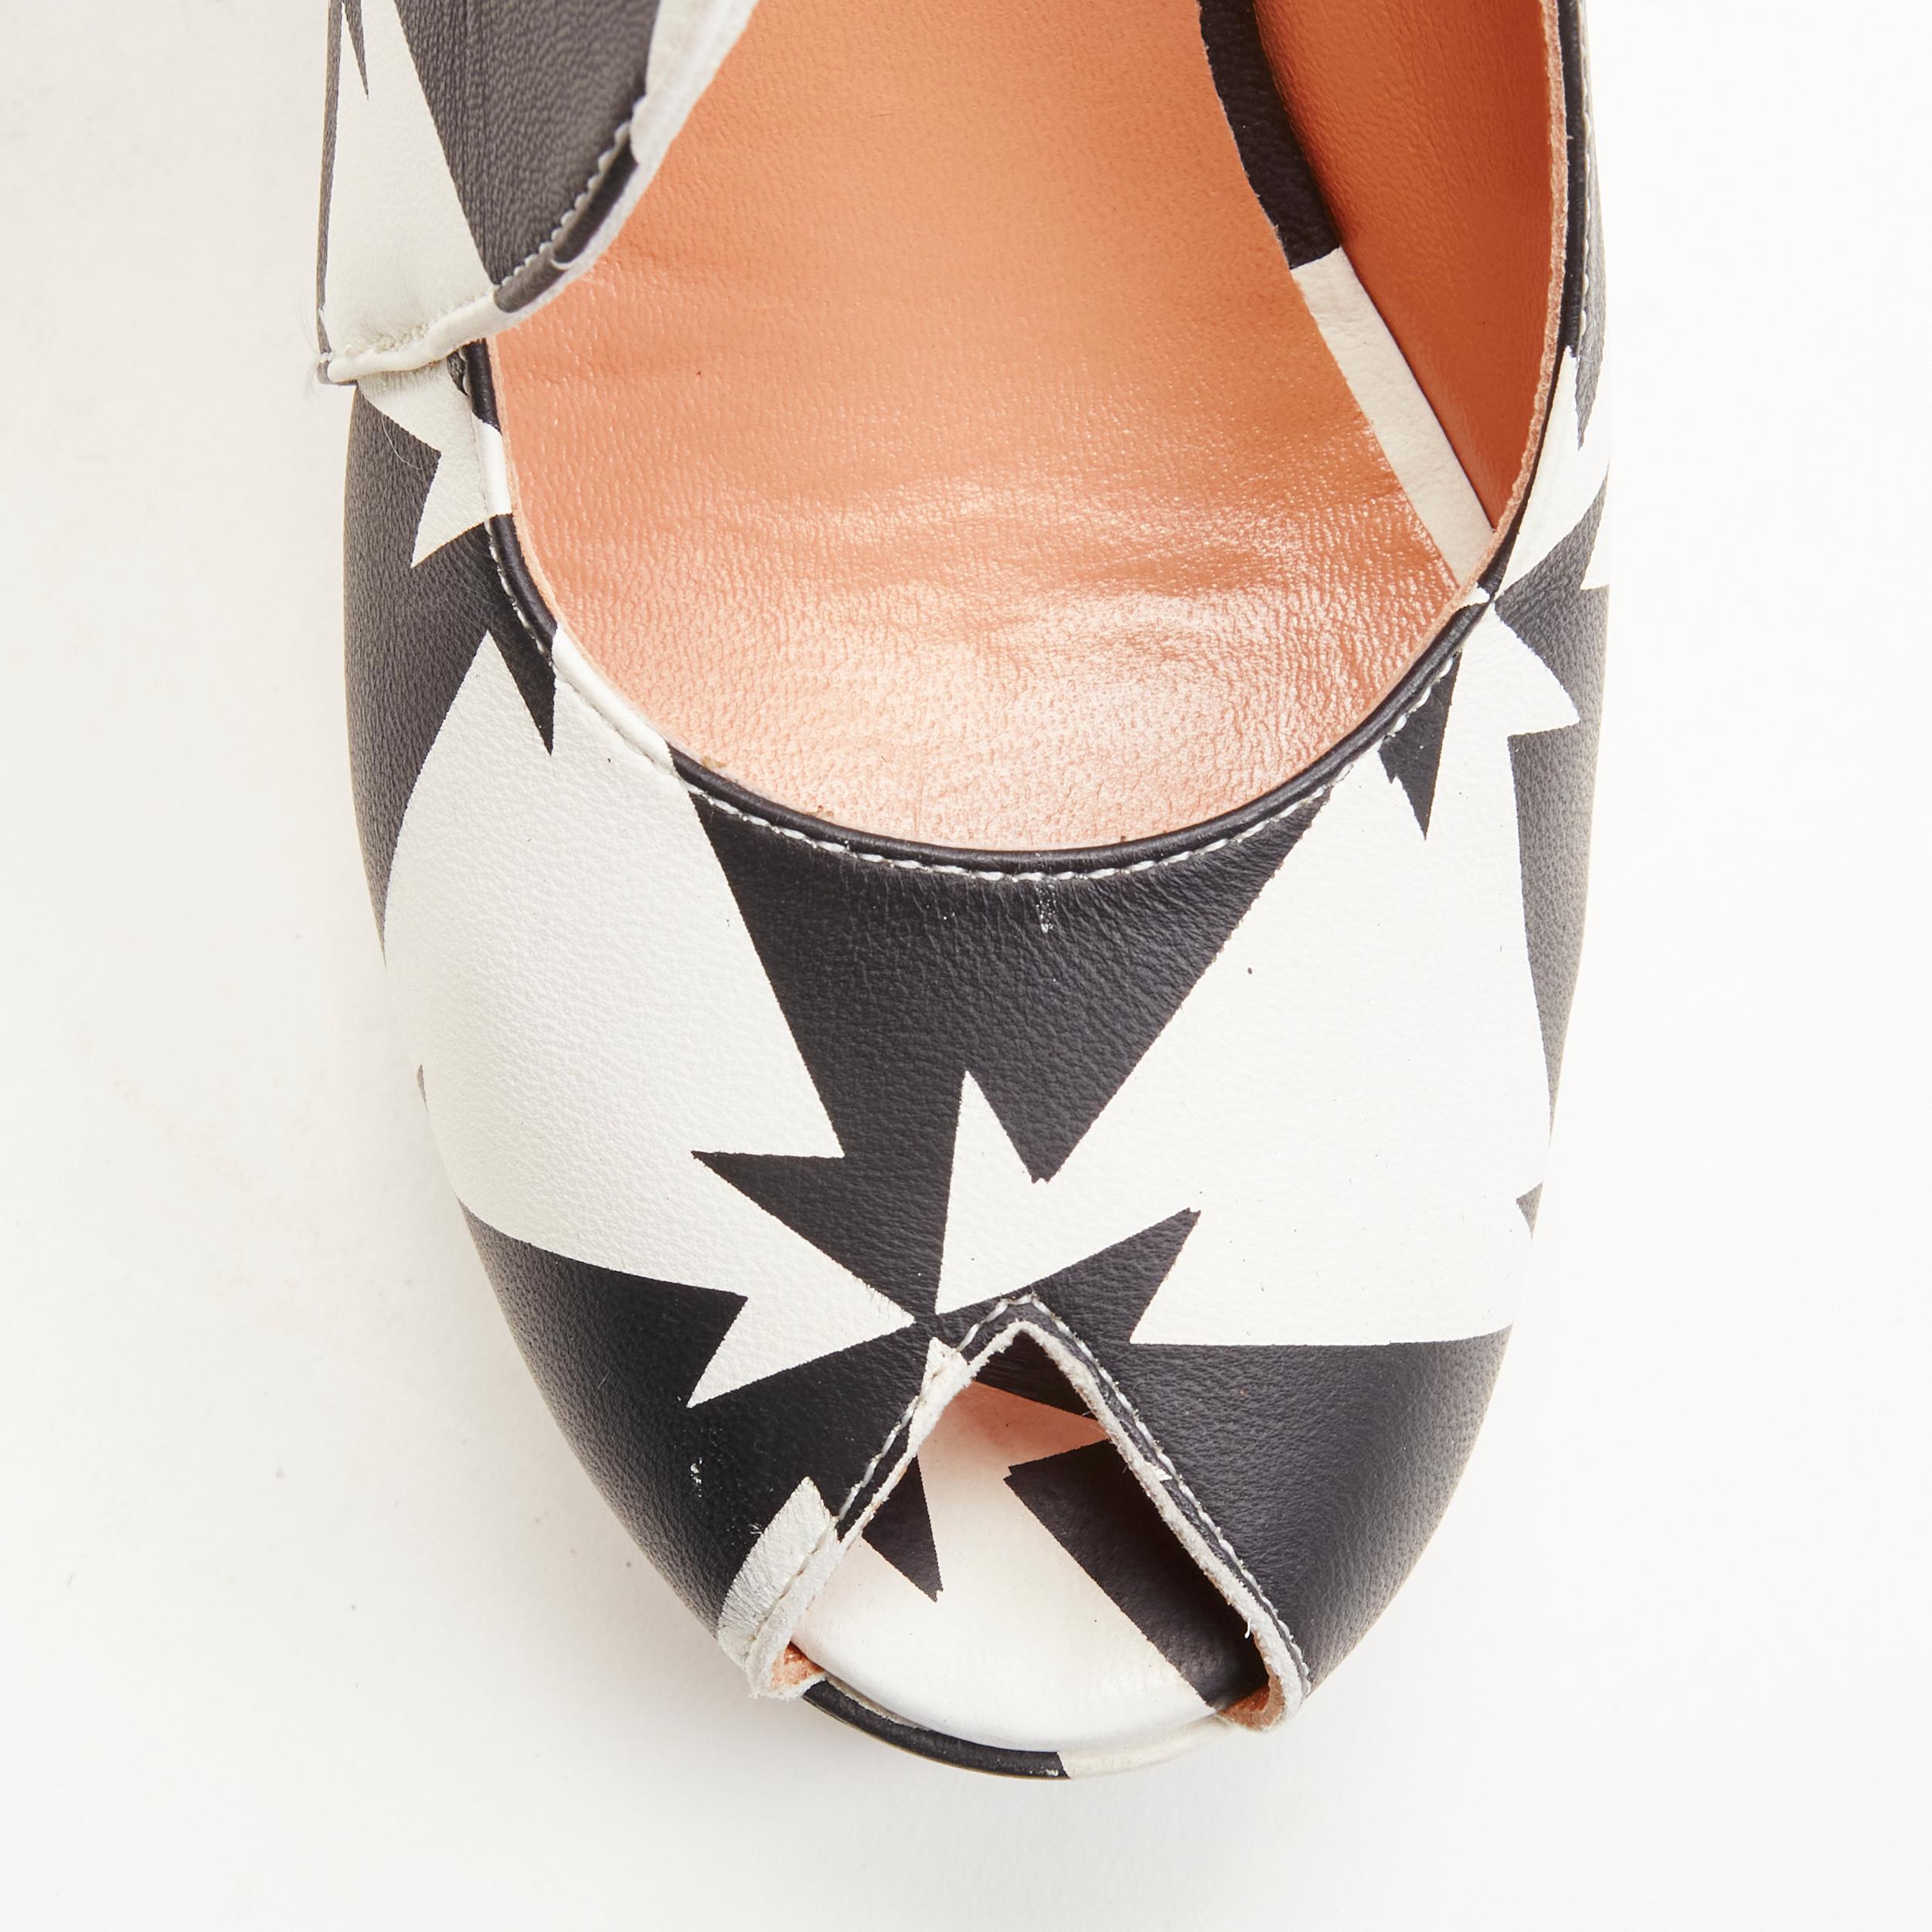 ROBERT CLERGERIE Louise Gray 2013 black white AGN graphic wedge heels EU37 2